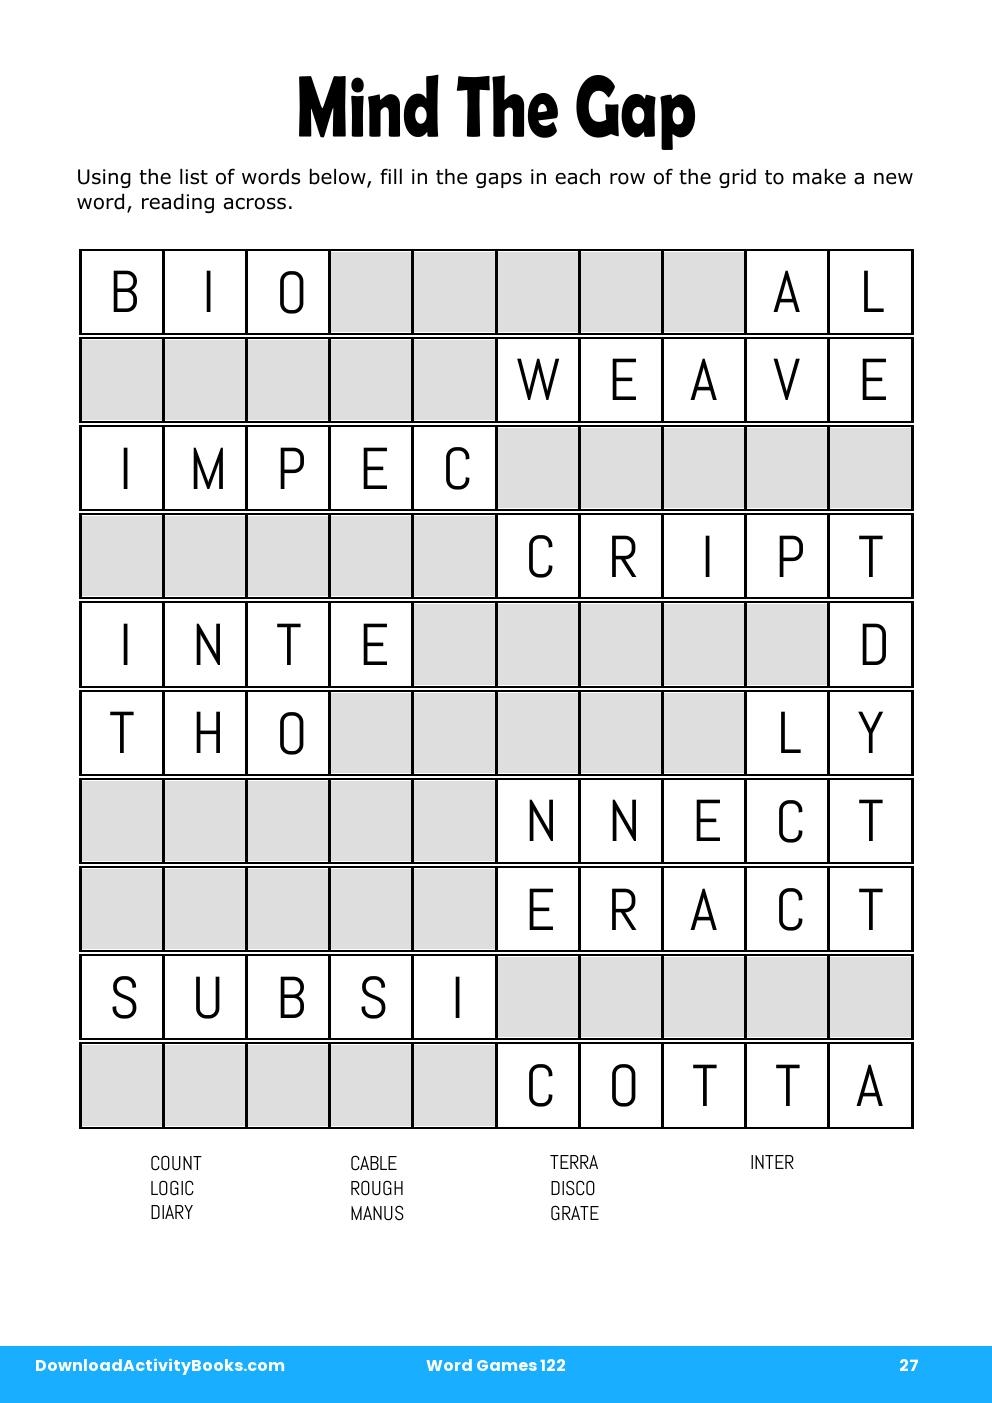 Mind The Gap in Word Games 122